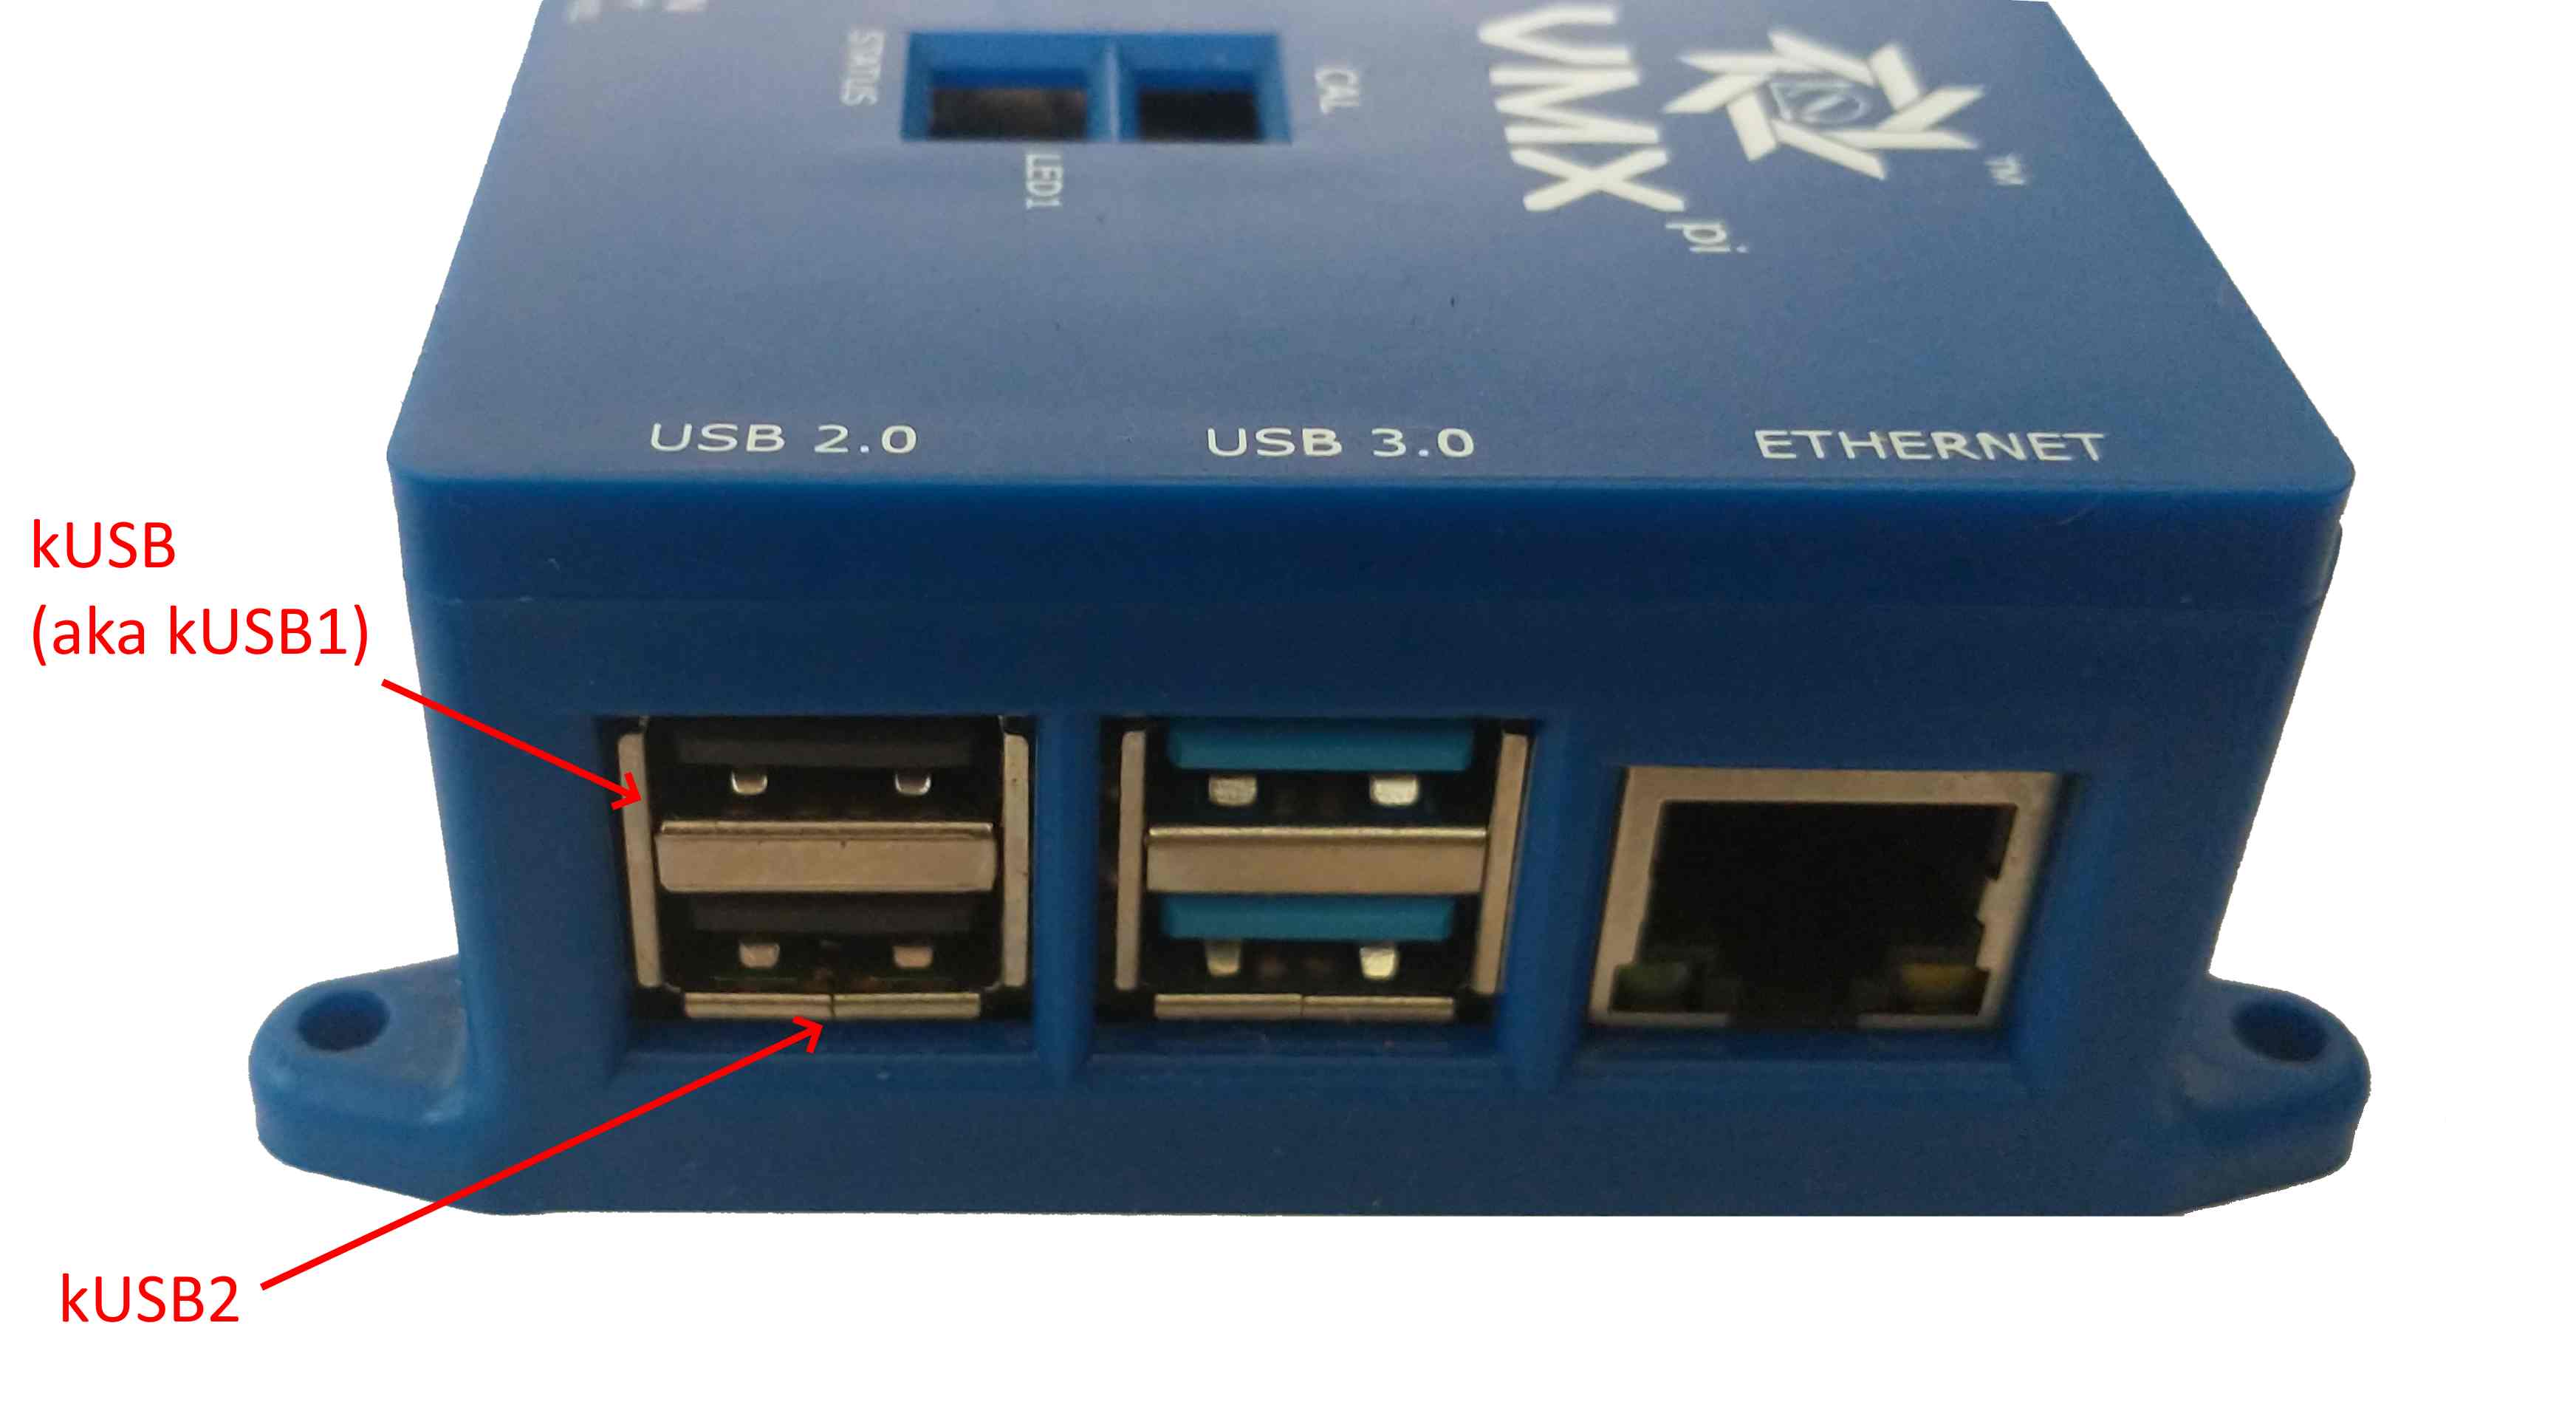 ../../_images/USB_Connector_Annotated.jpg